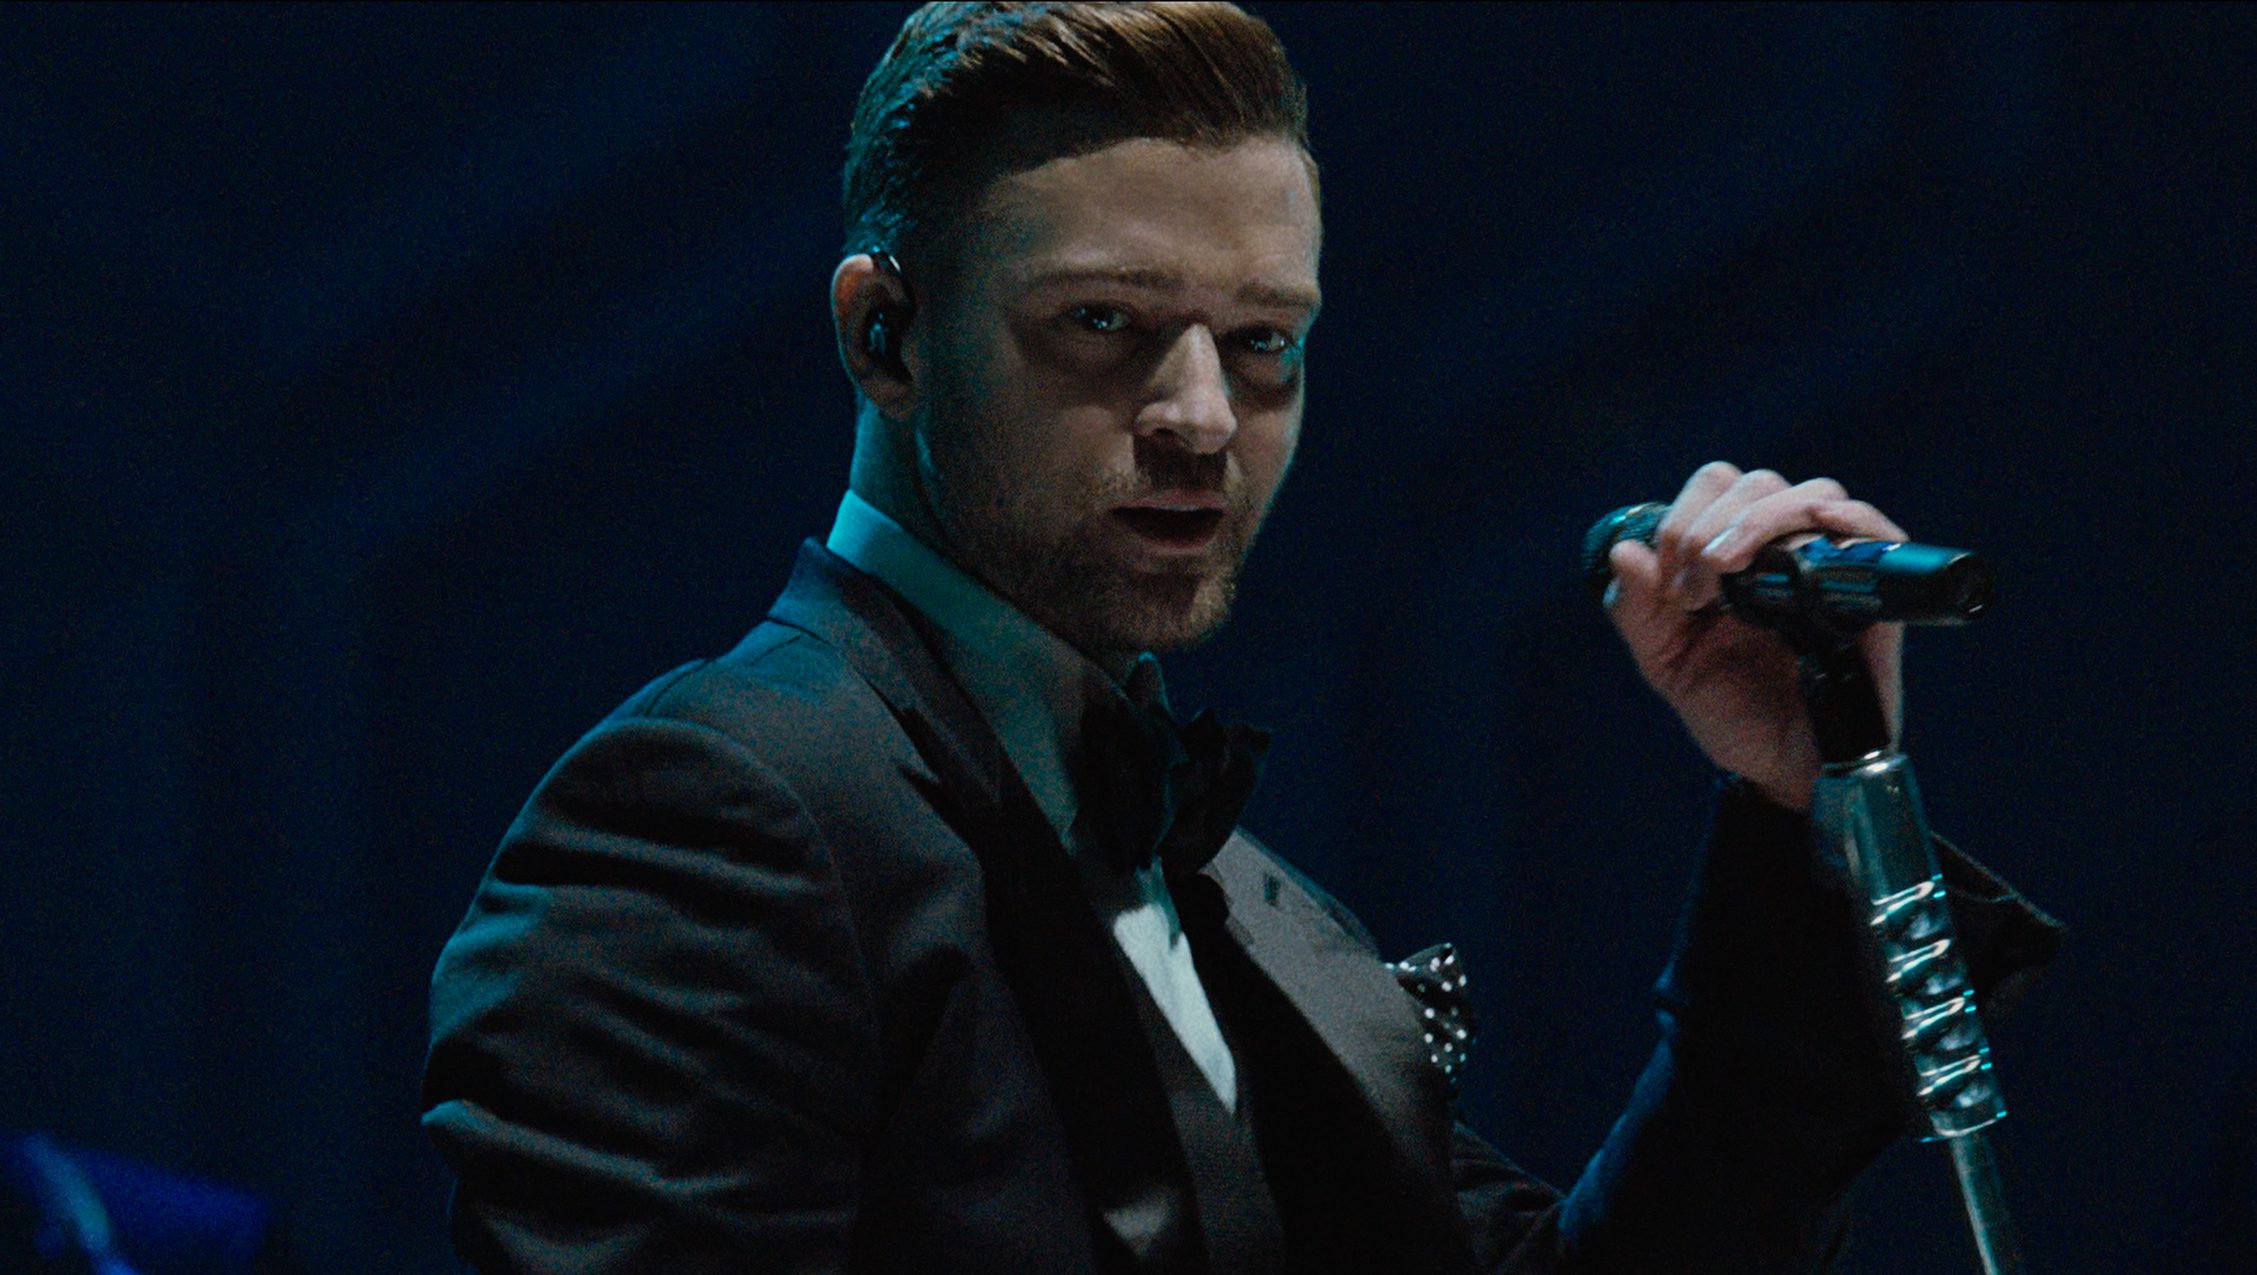 When Is the Justin Timberlake Movie Released on Netflix?